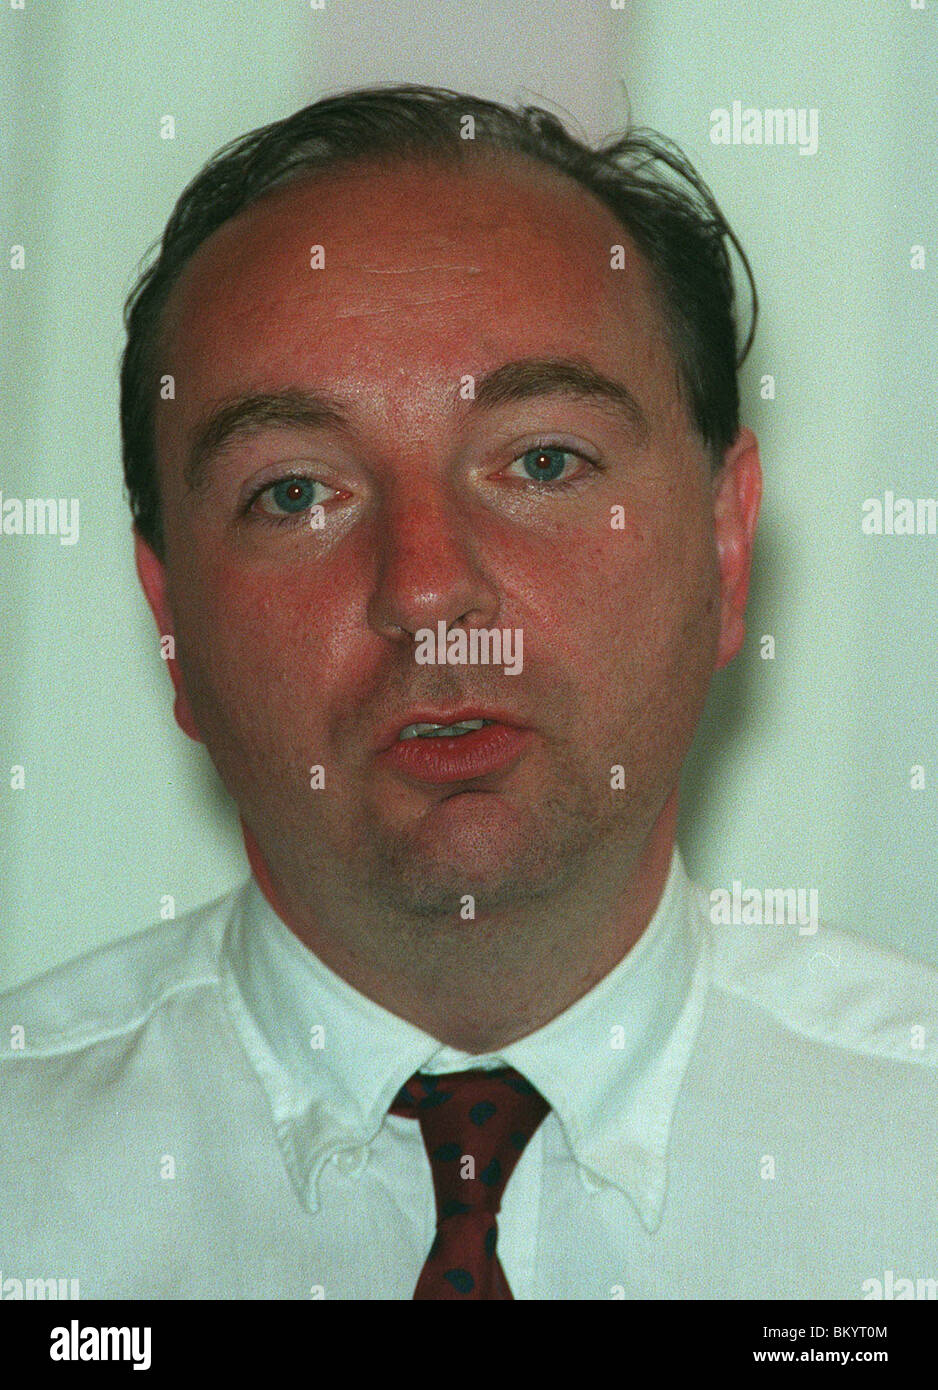 NORMAN BAKER MP LIBERAL PARTY LEWES 17 October 1997 Stock Photo - Alamy